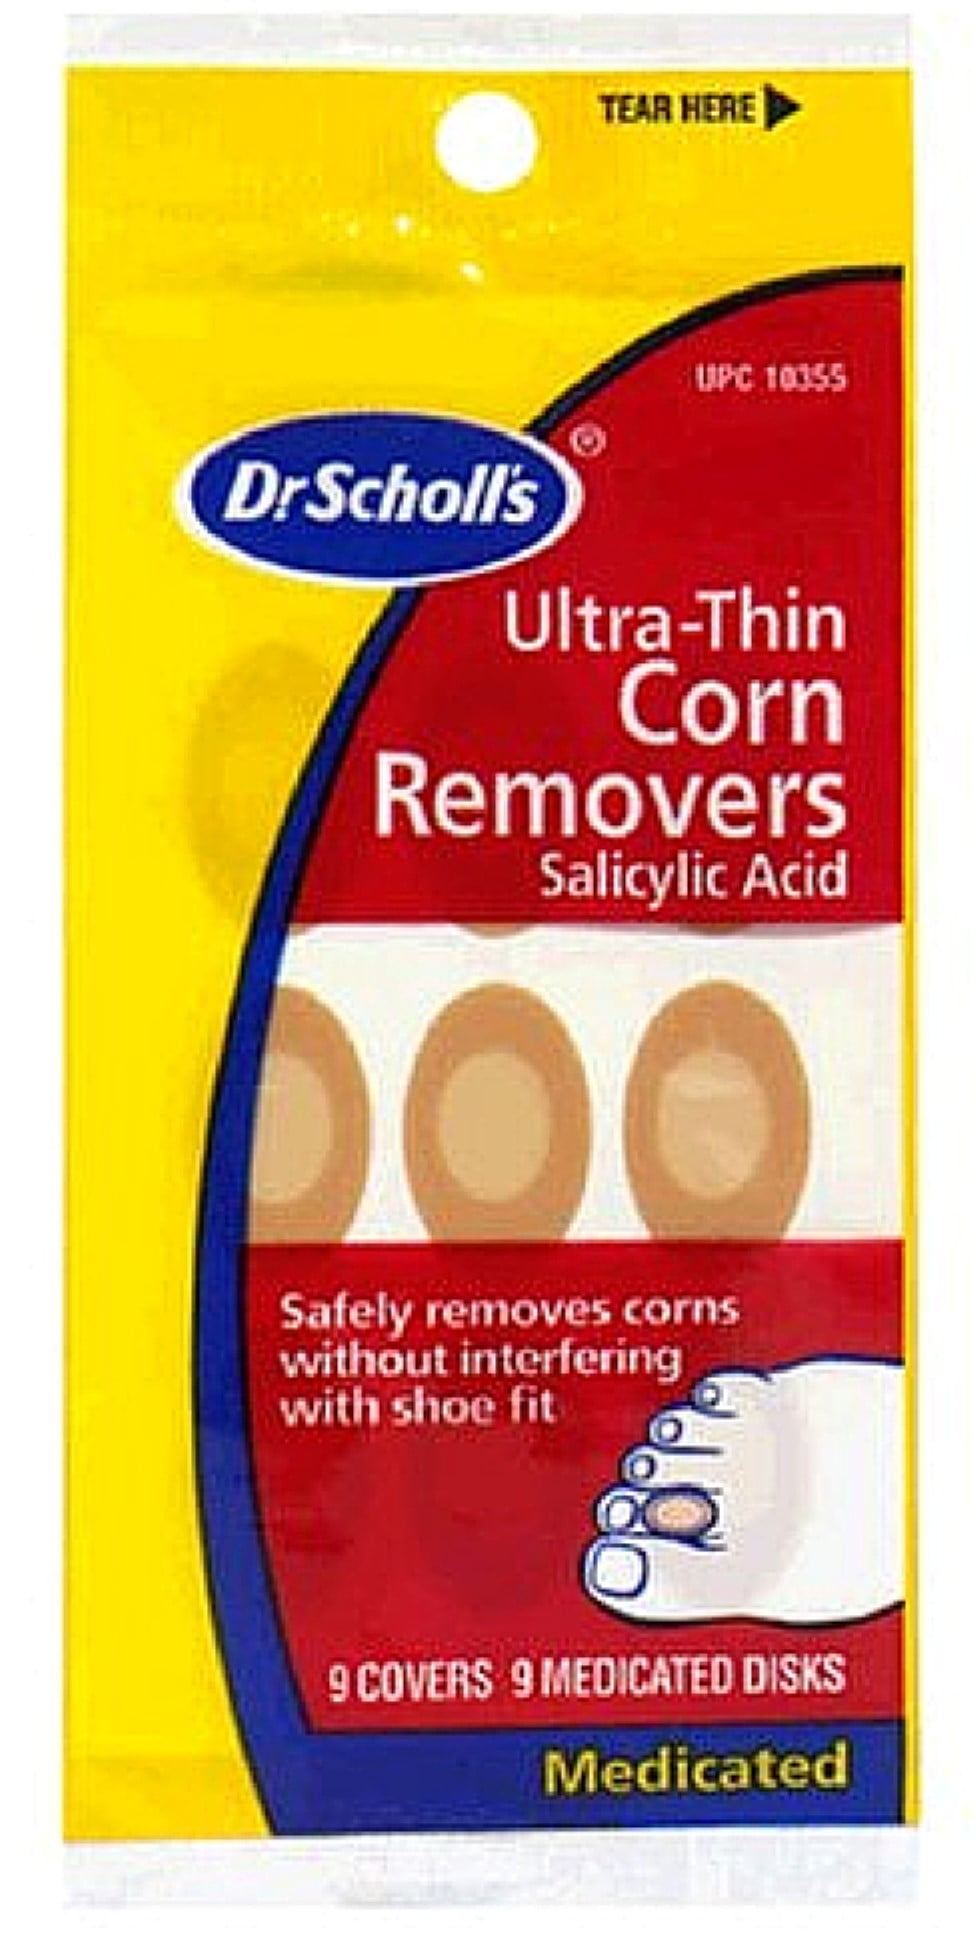 Dr. Scholl's Ultra-Thin Corn Removers 9 